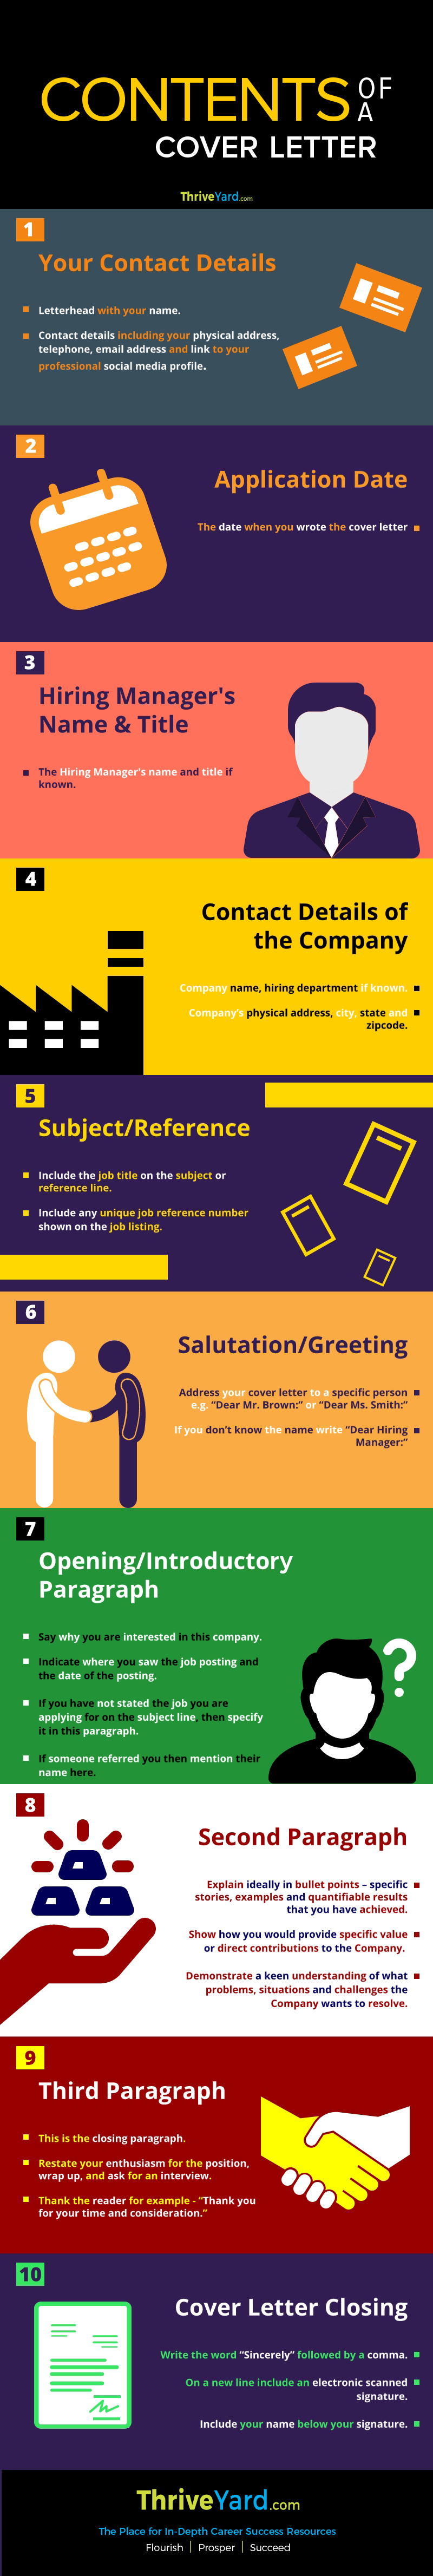 Contents of a Cover Letter - Infographic